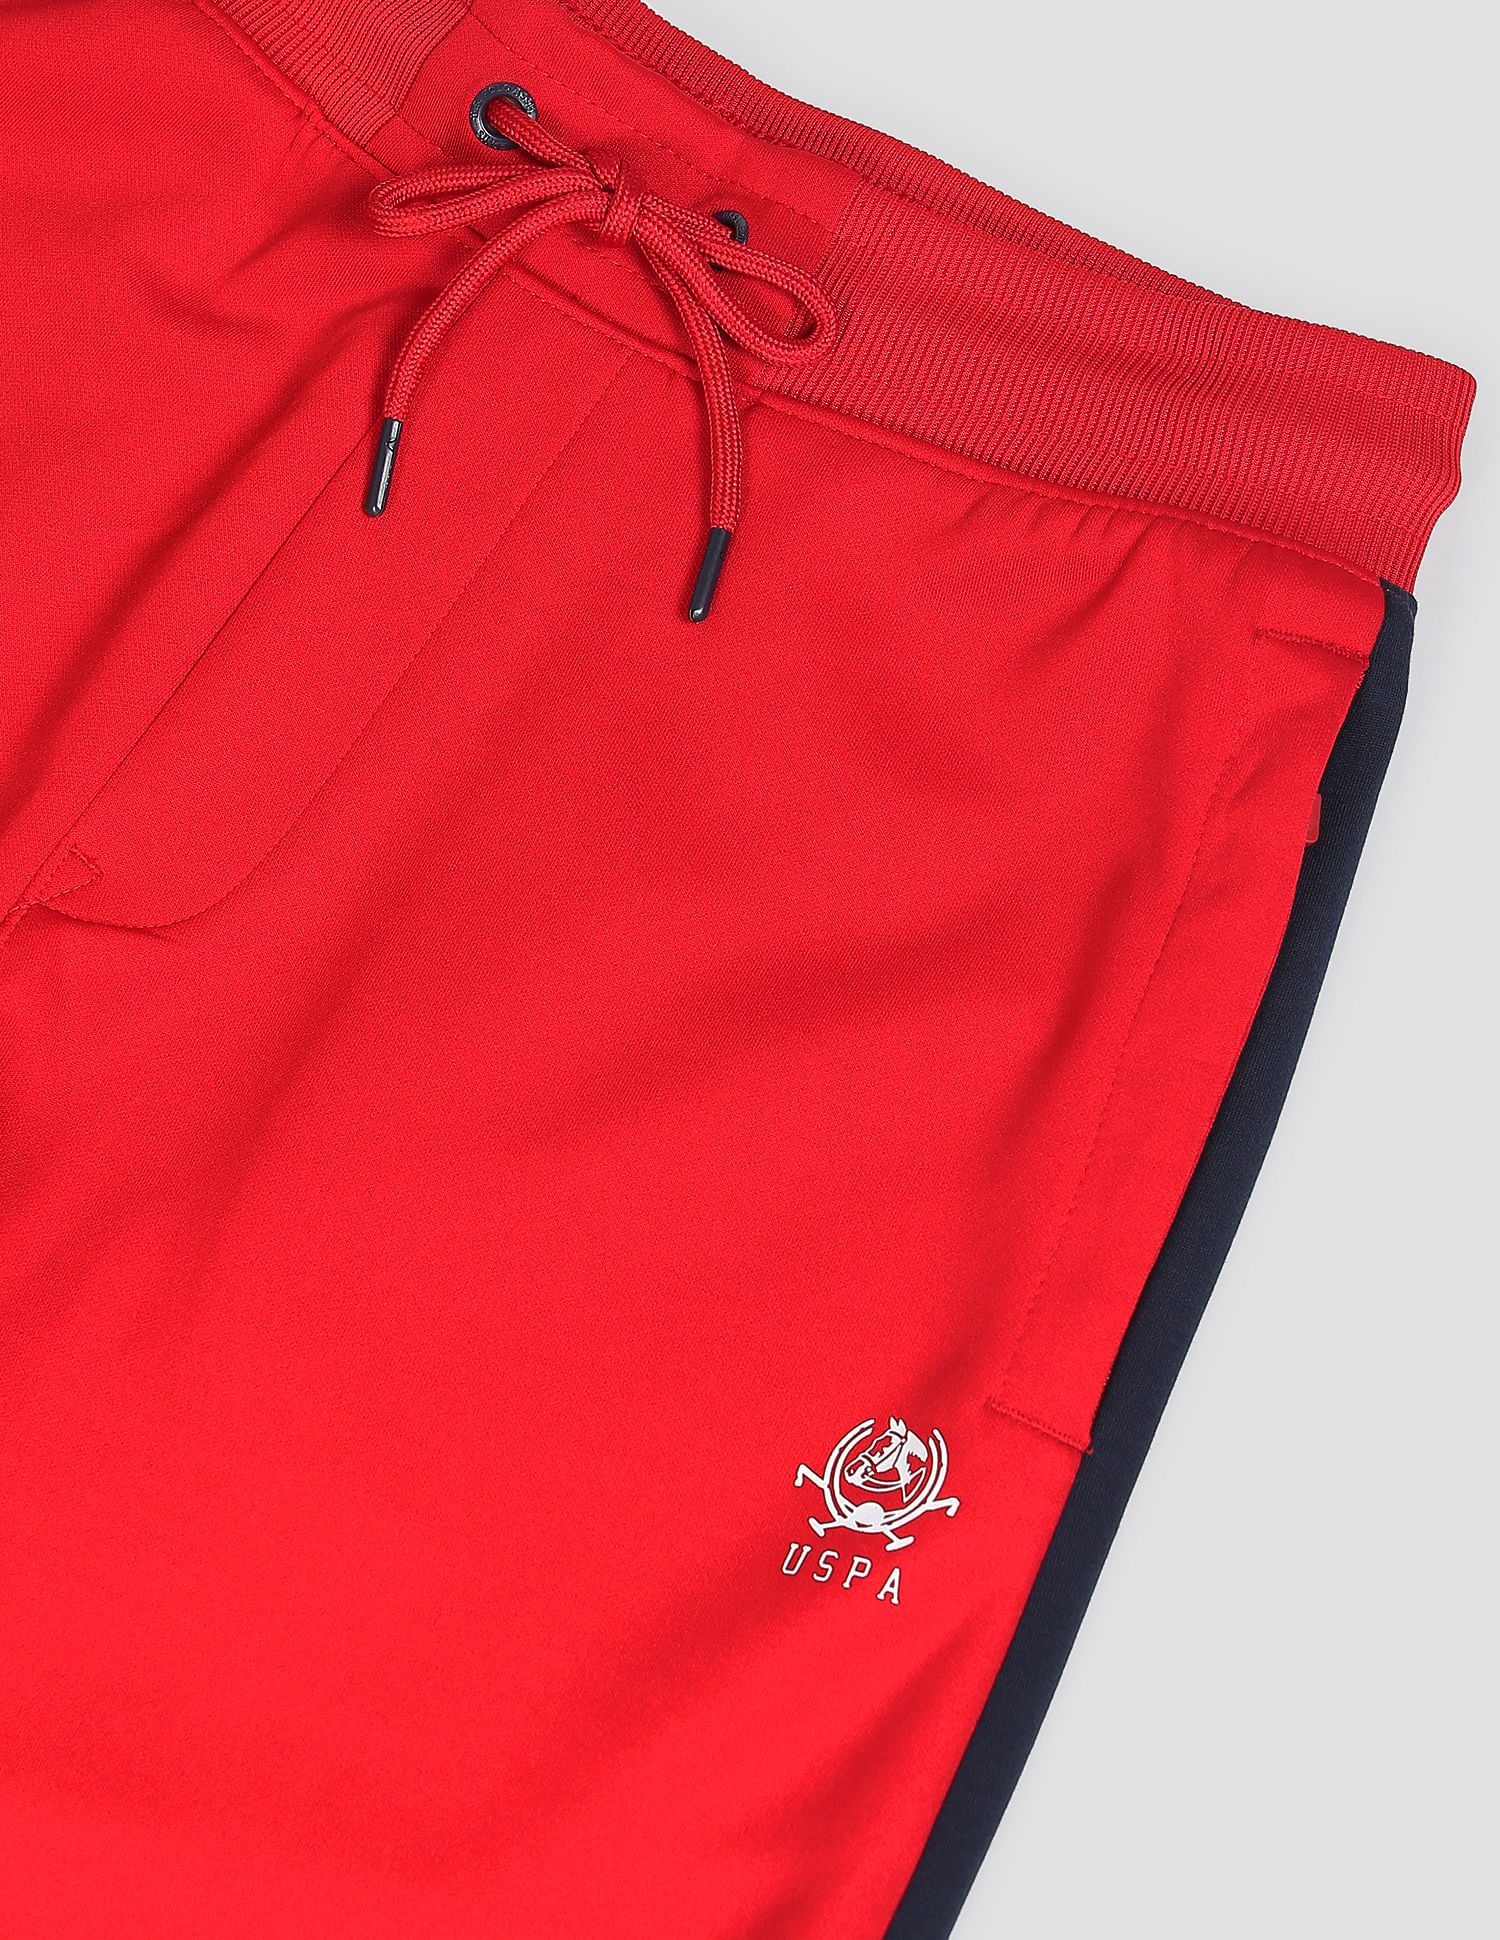 U.S. Polo Assn. Boys Active Wear Joggers Sweatpants Size 5/6 Gray Red on  eBid United States